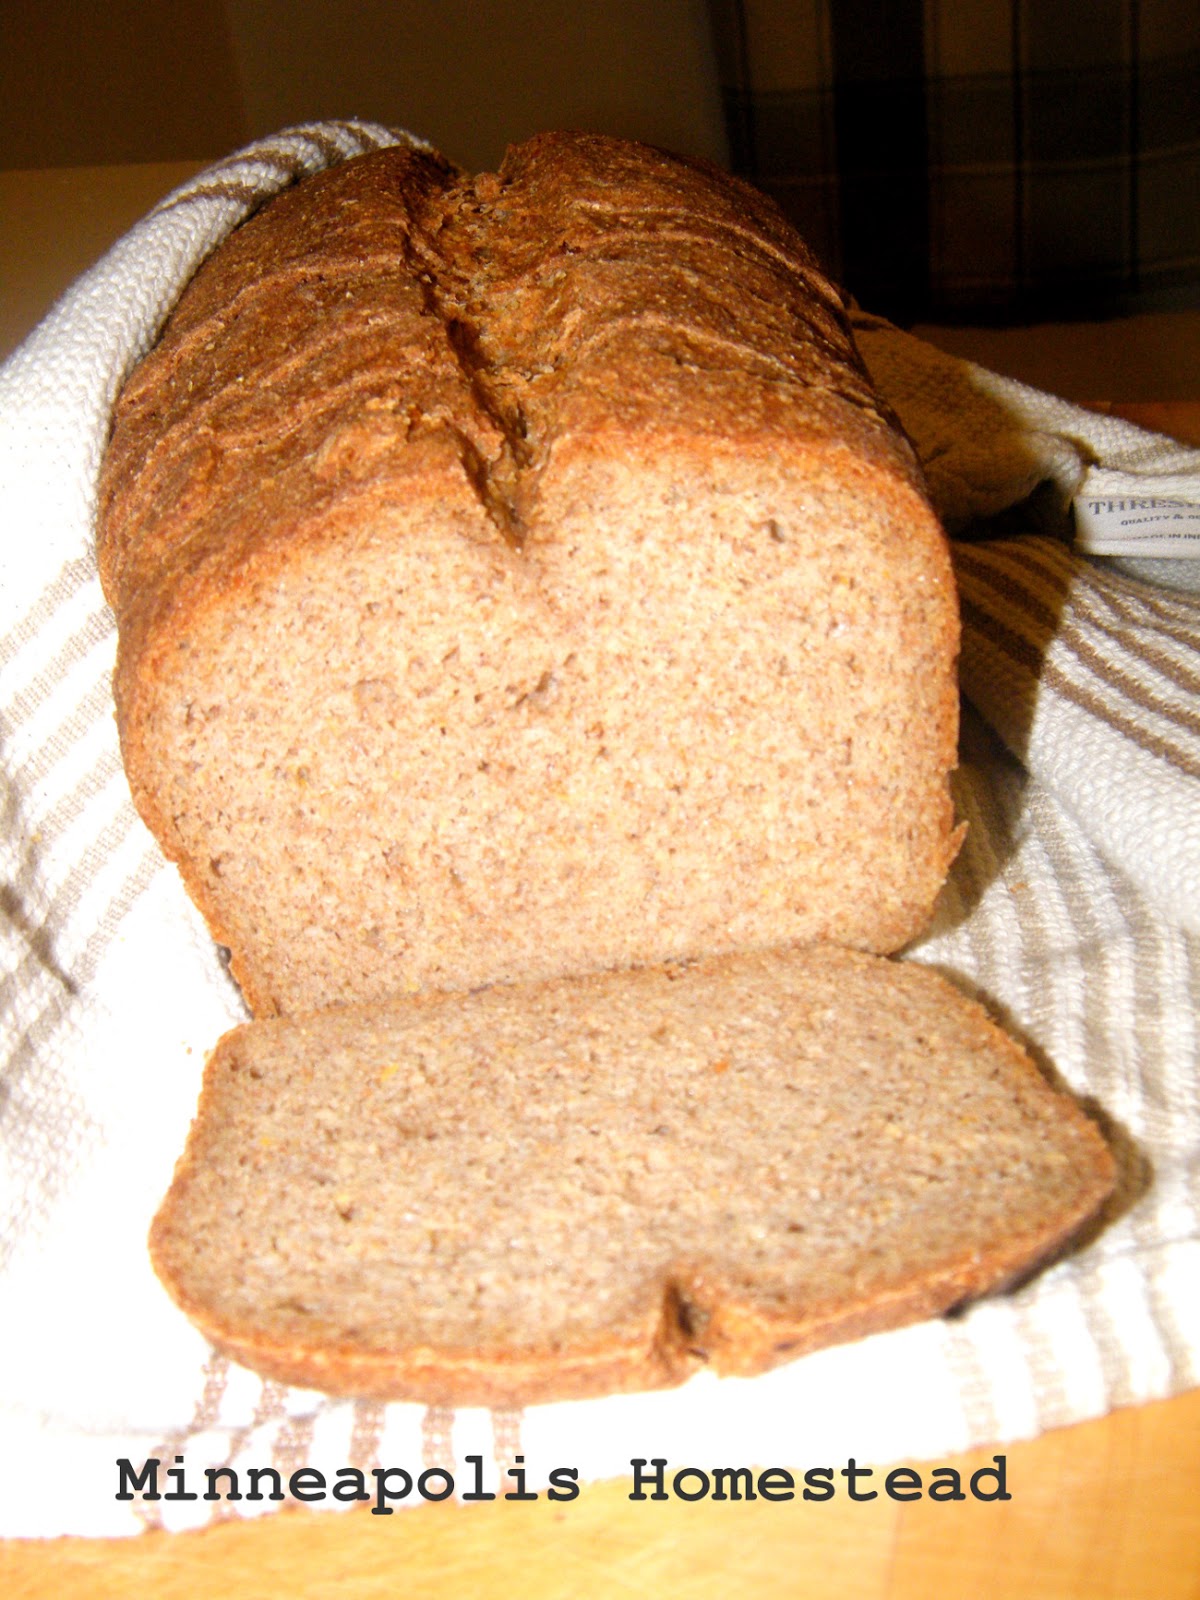 Healthy Fluffy High Fiber Yeast Bread Recipe Recipe For One Or Two Loaves Minneapolis Homestead